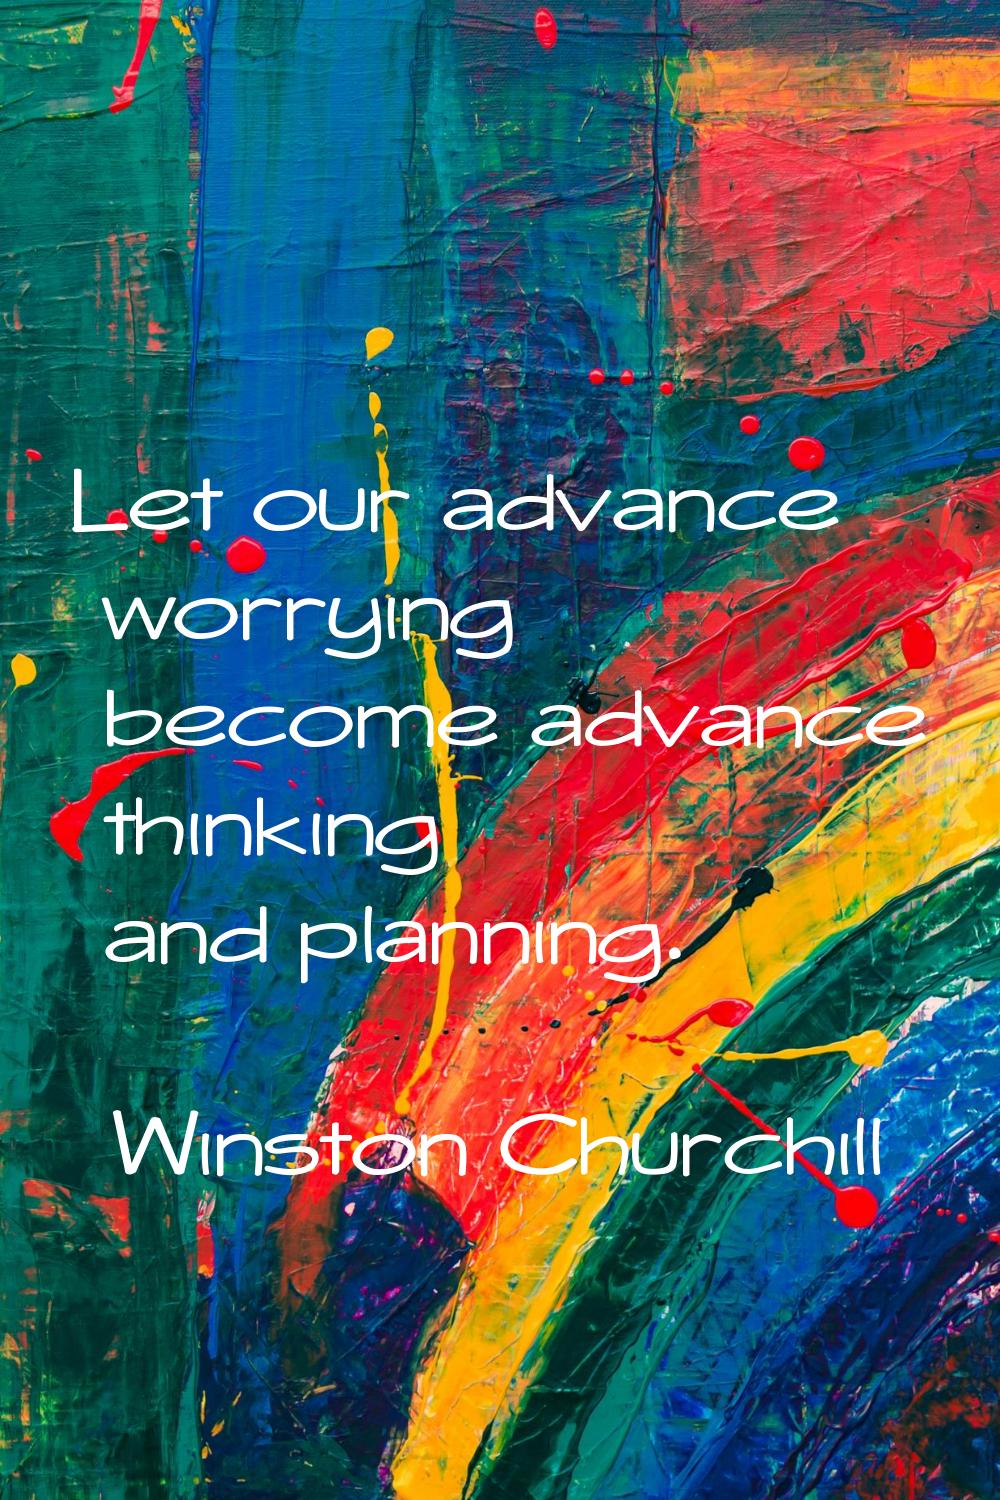 Let our advance worrying become advance thinking and planning.